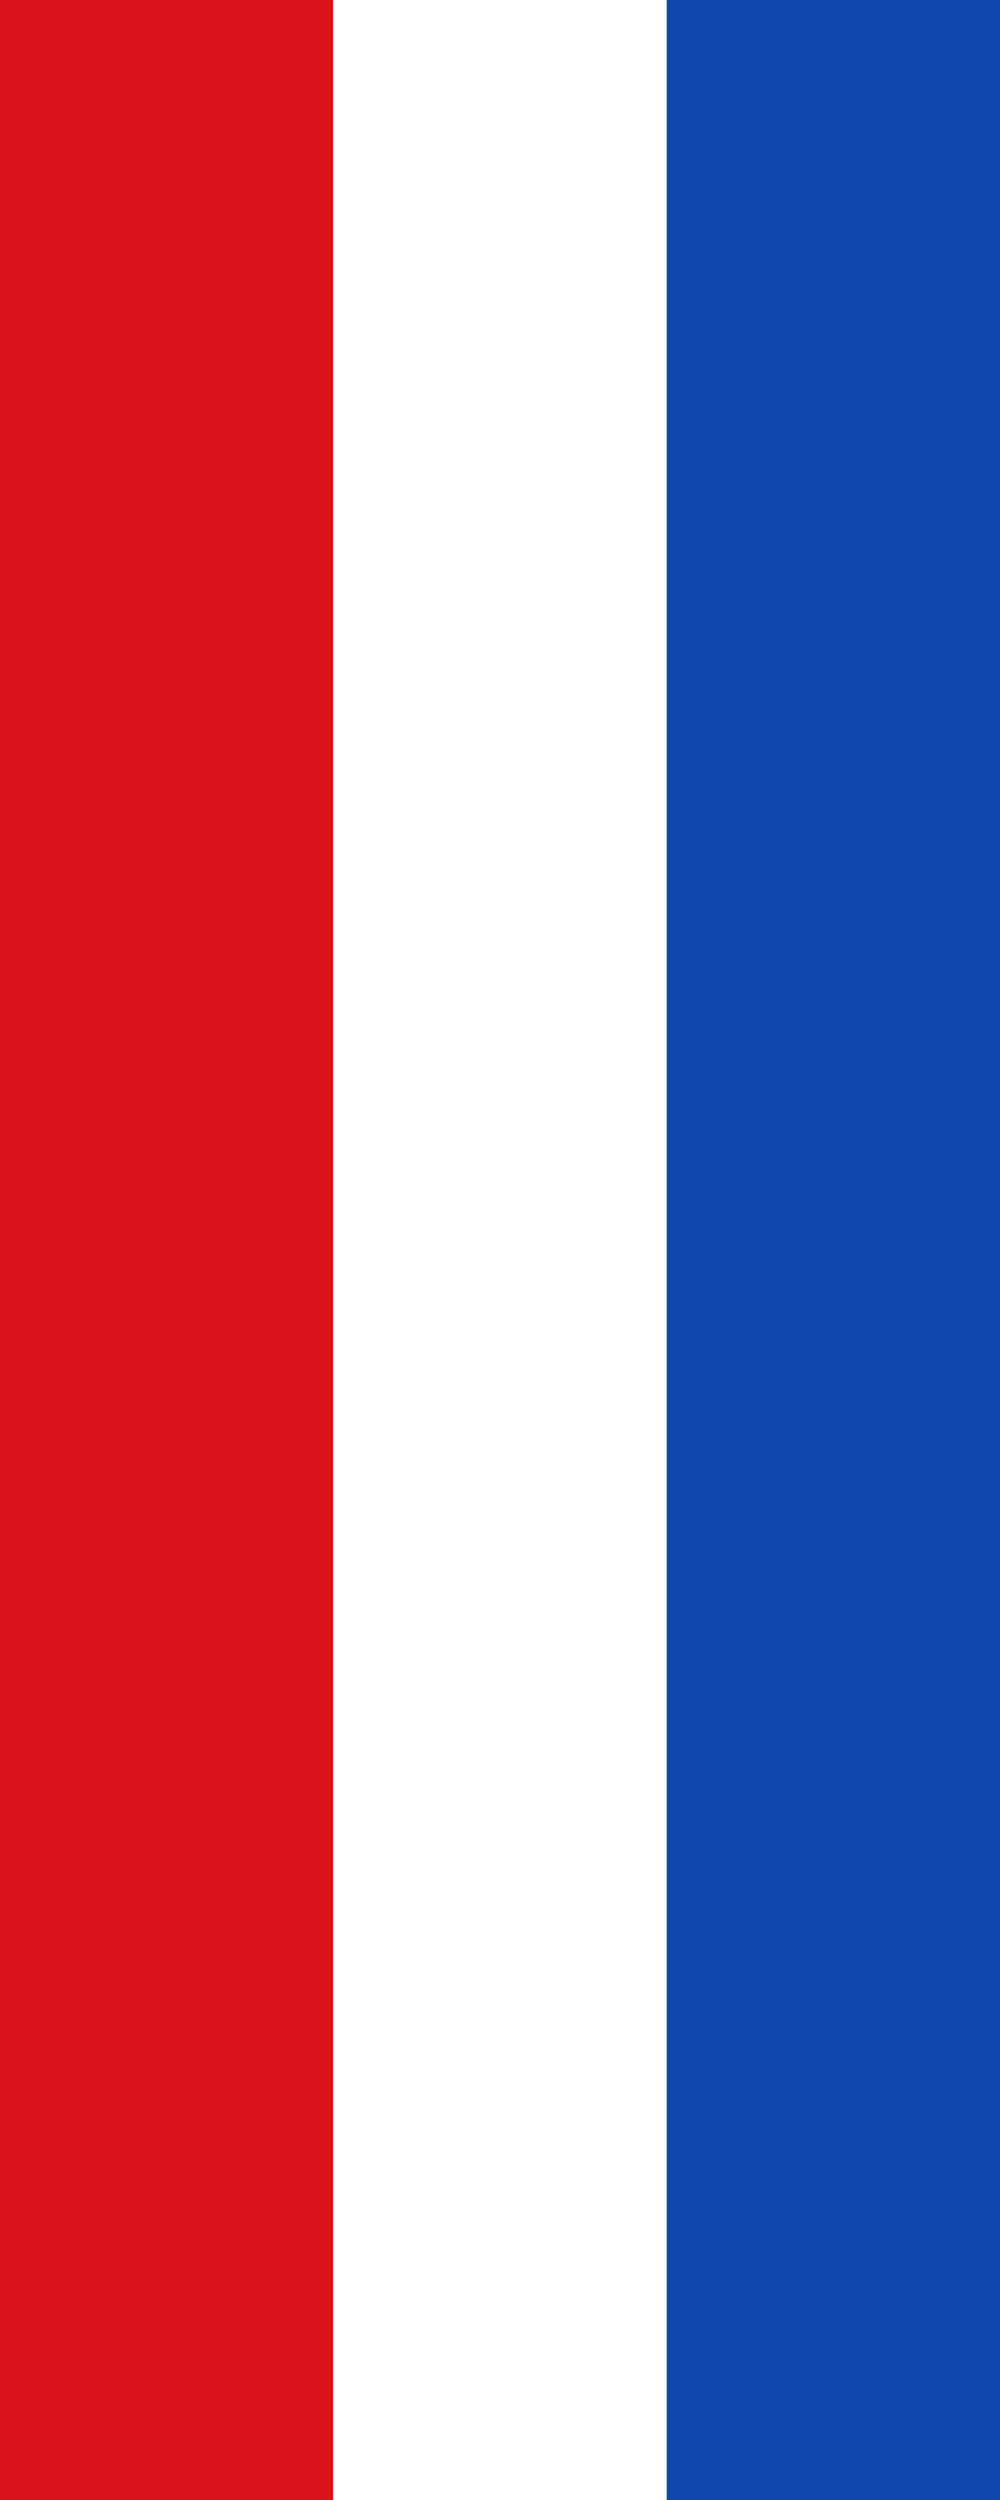 Red White and Blue Flag Logo - File:Flag red white blue 2x5.svg - Wikimedia Commons